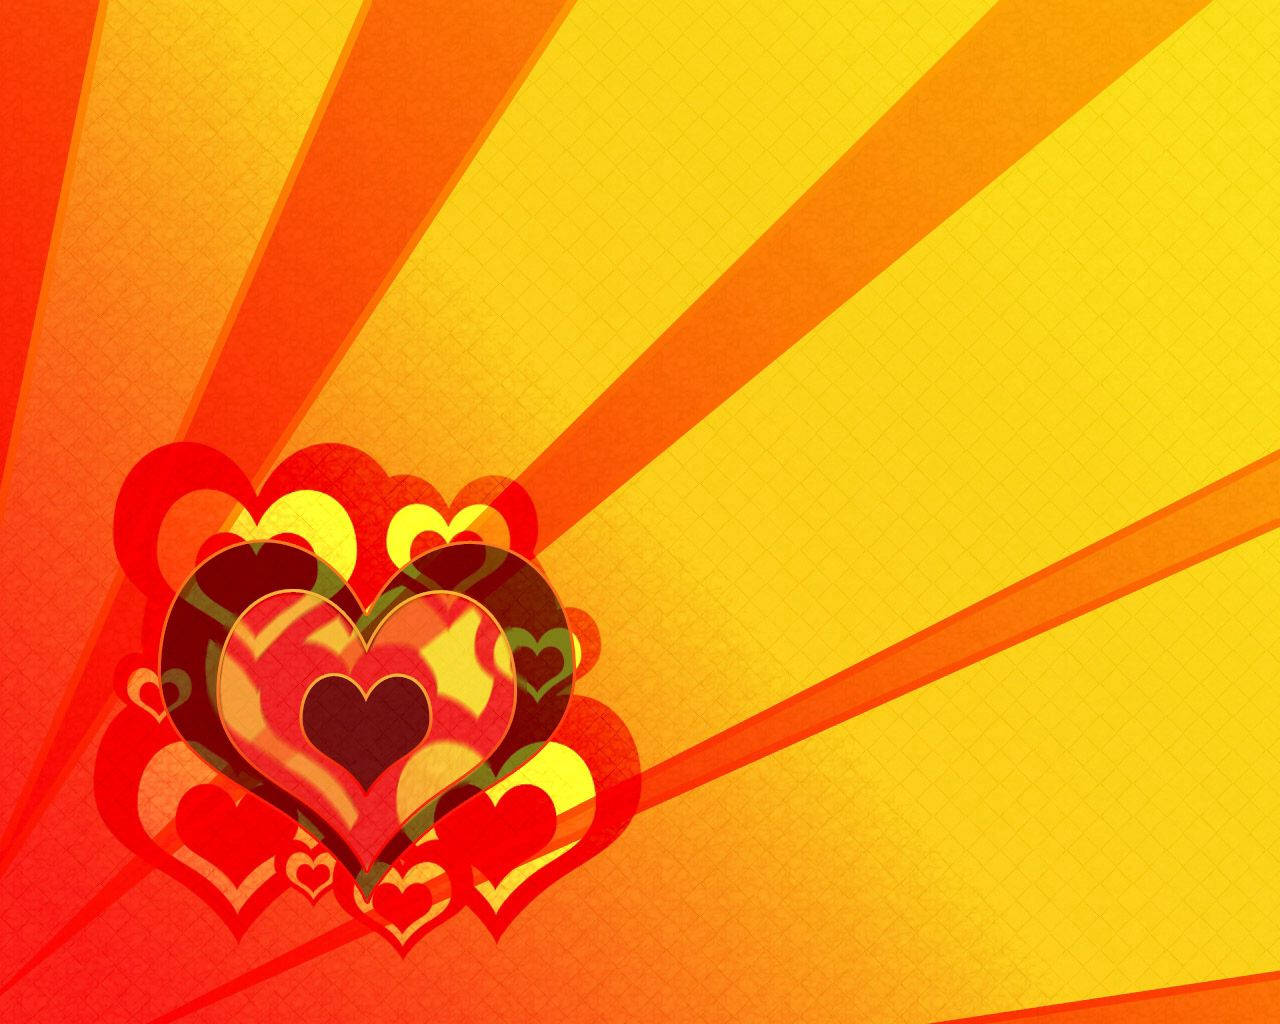 Bunch Of Hearts And Orange Lines Wallpaper